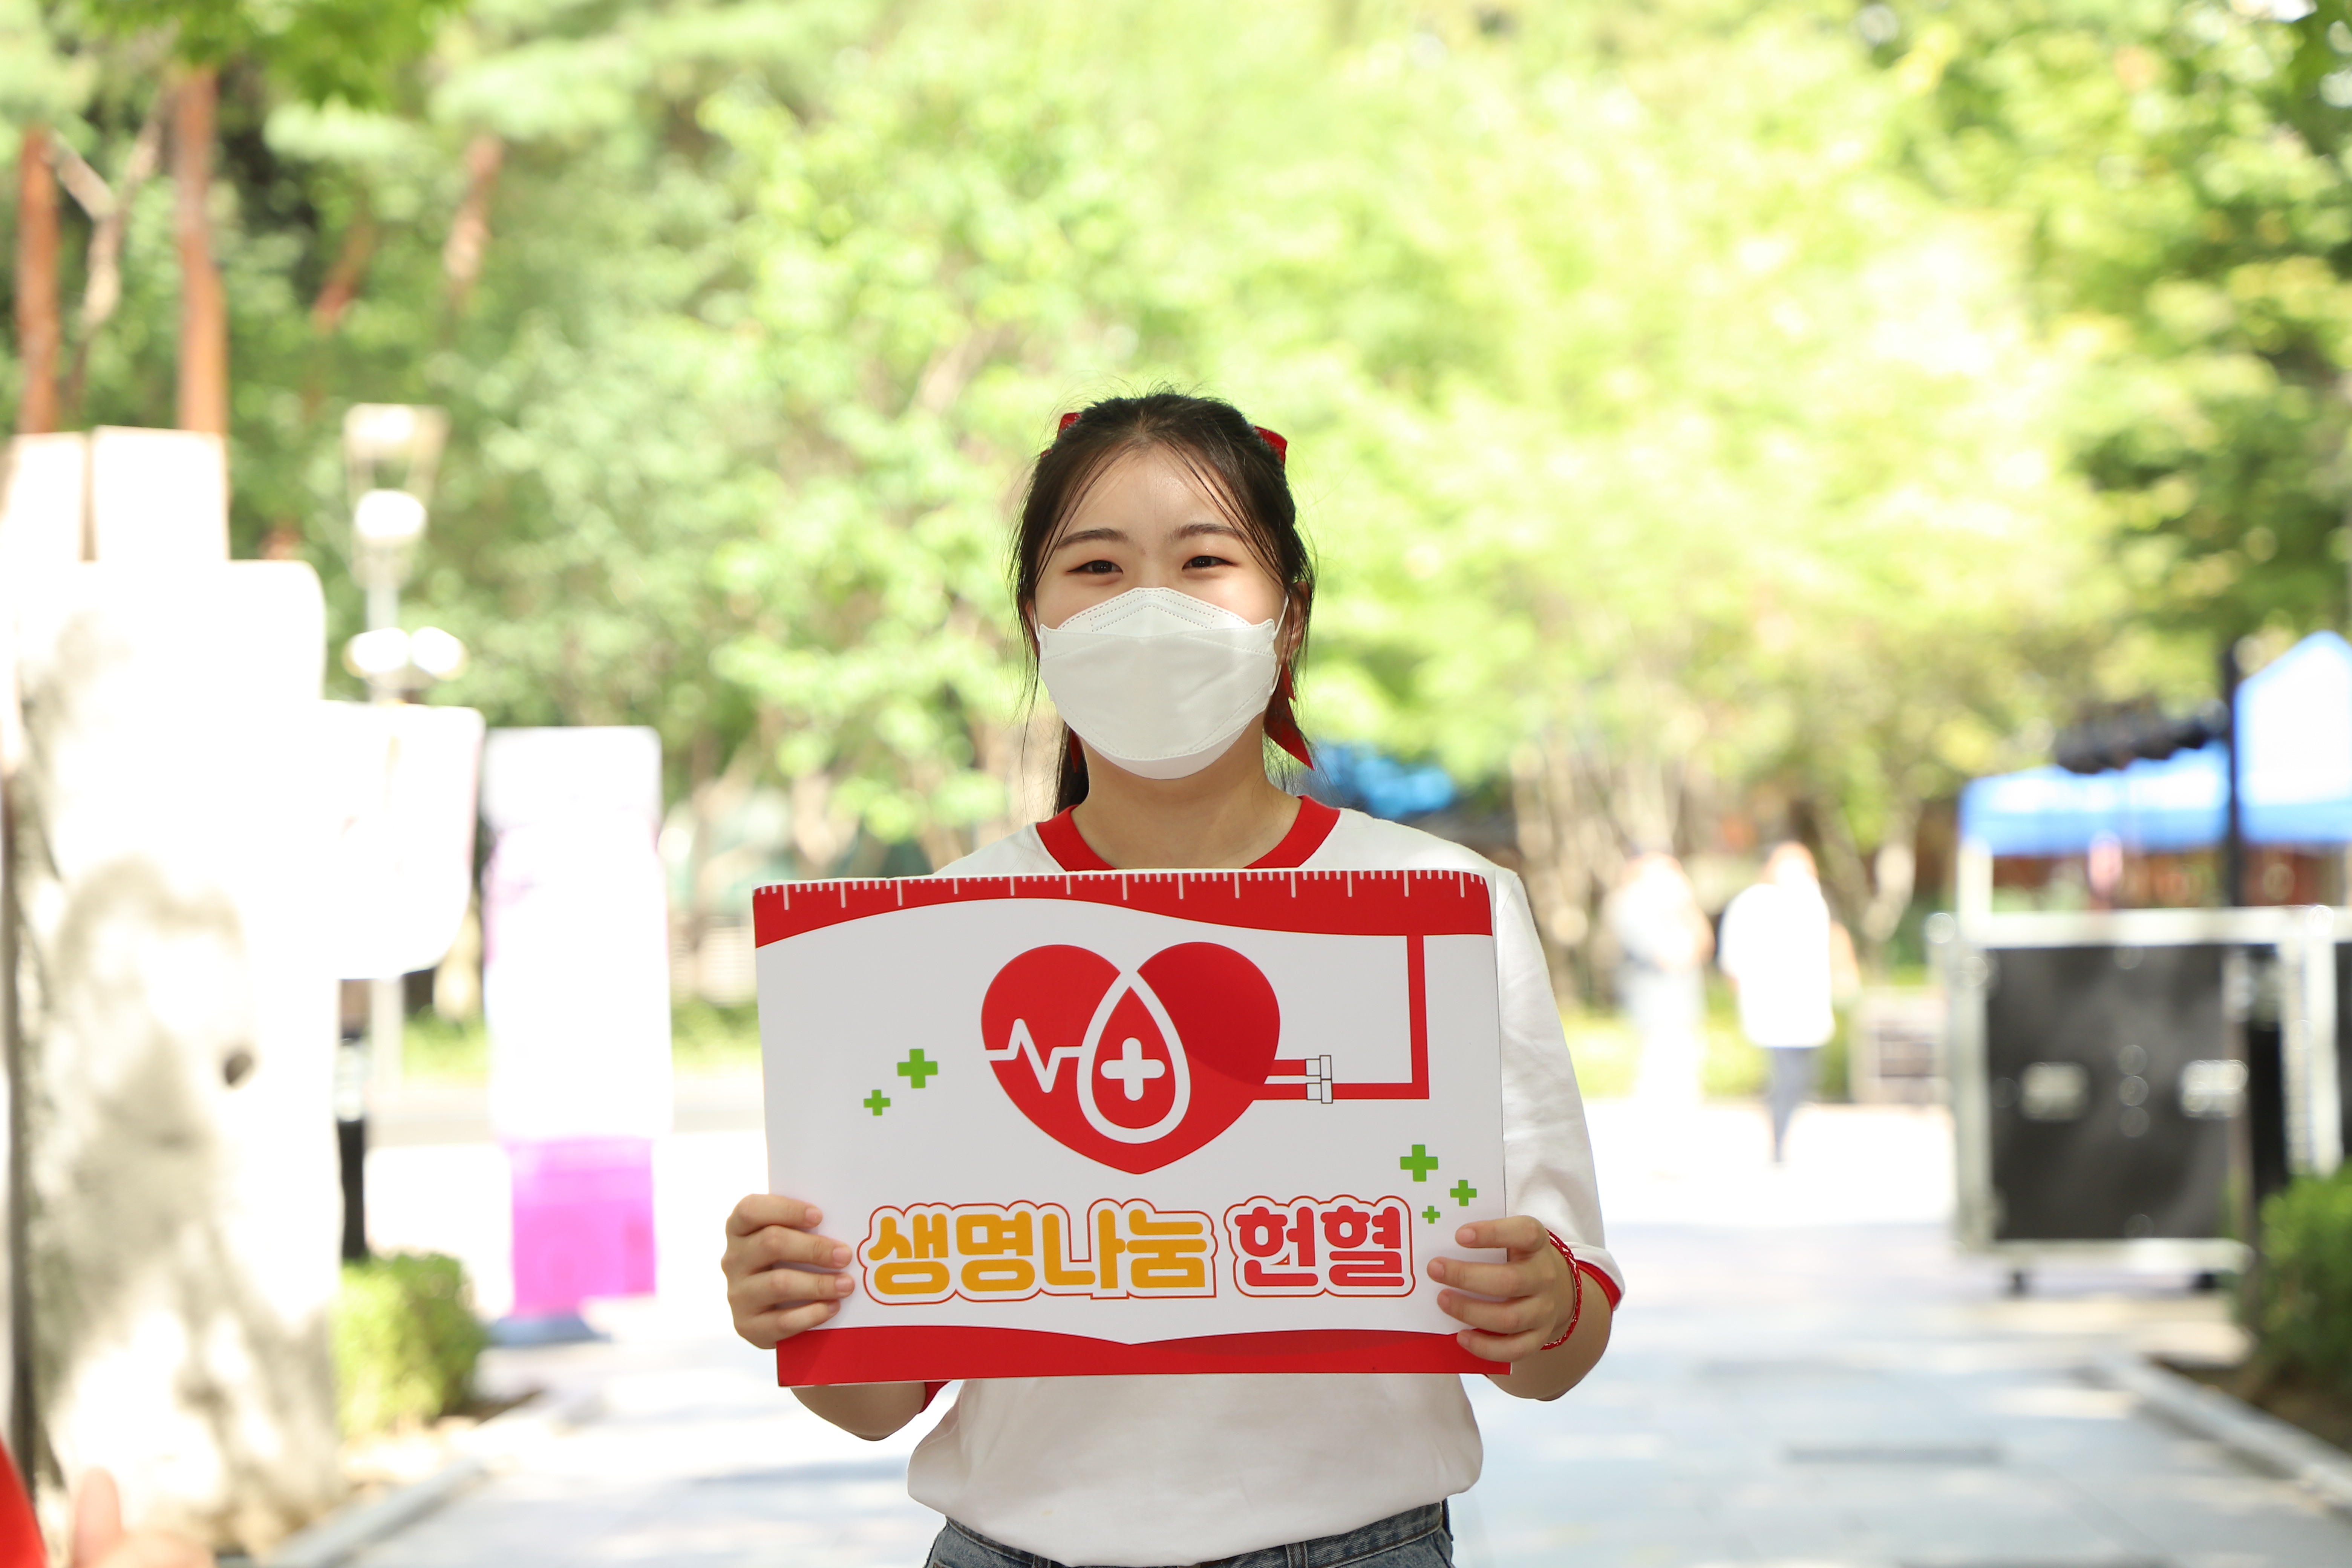 We Are One Youth Volunteers of the Daegu Branch Register to Donate Blood